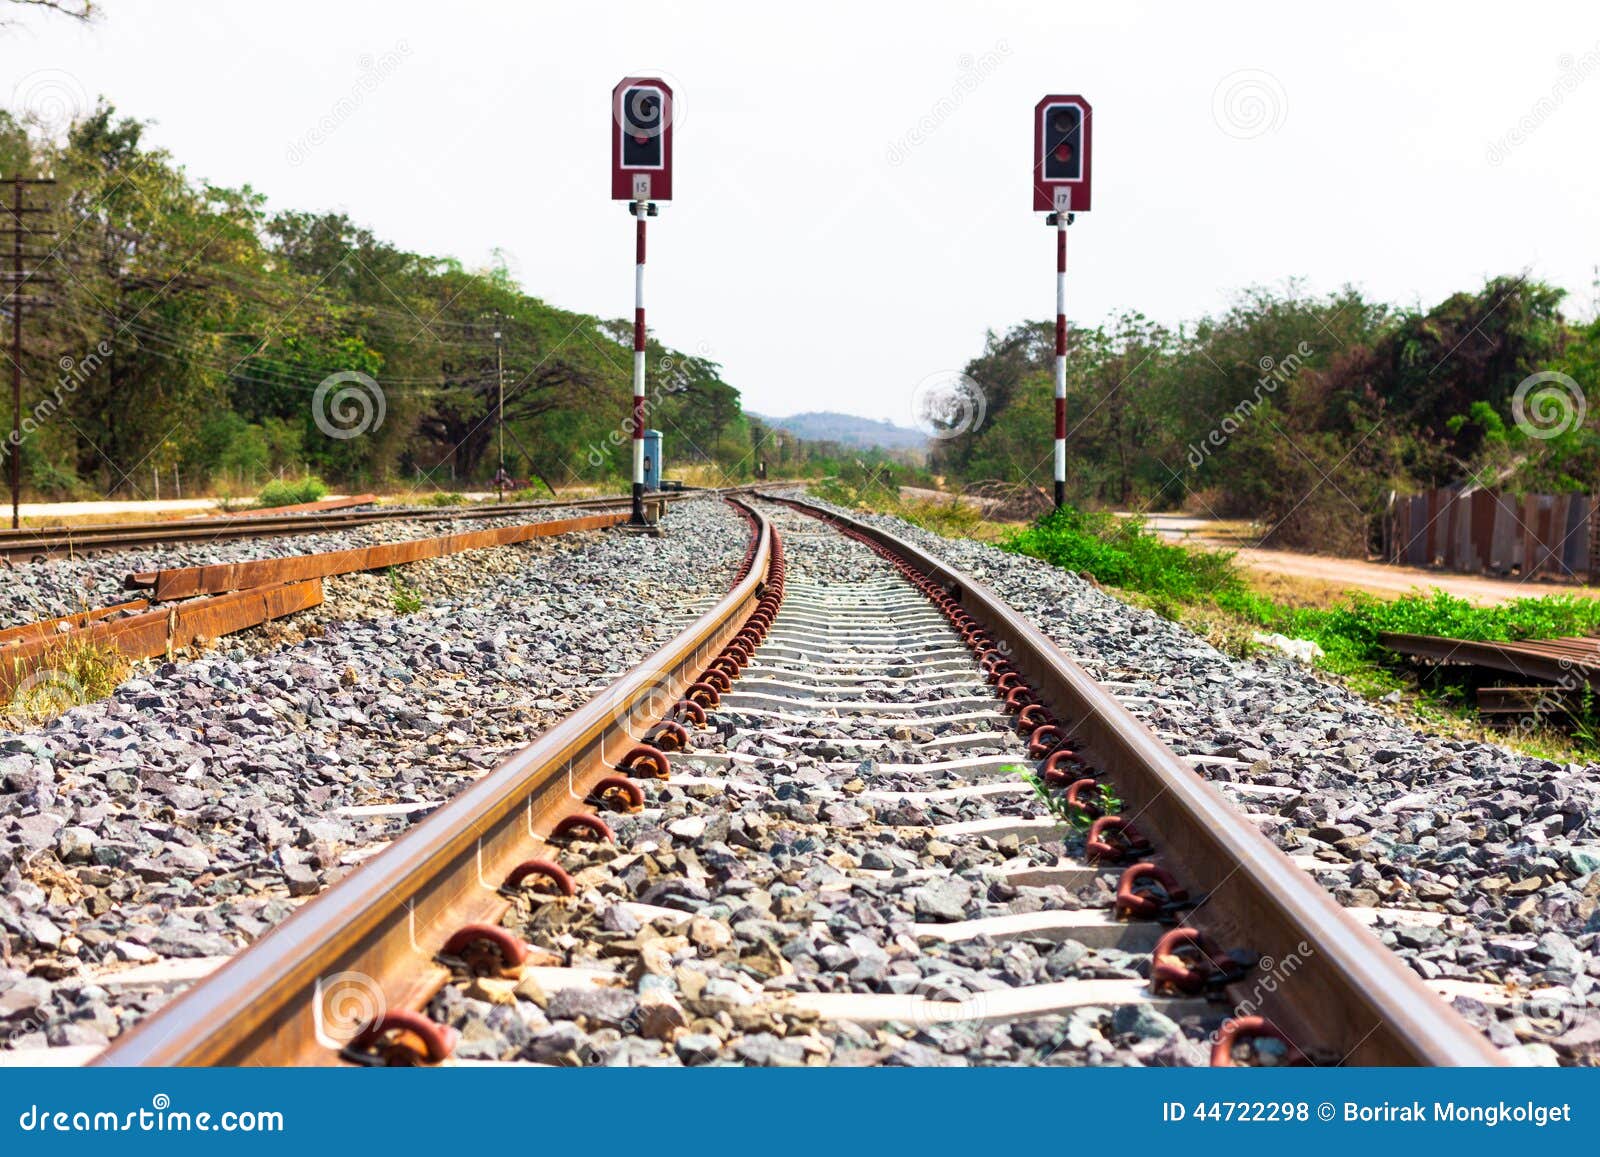 Railway Tracks with Signals on Background Stock Photo - Image of direction,  background: 44722298